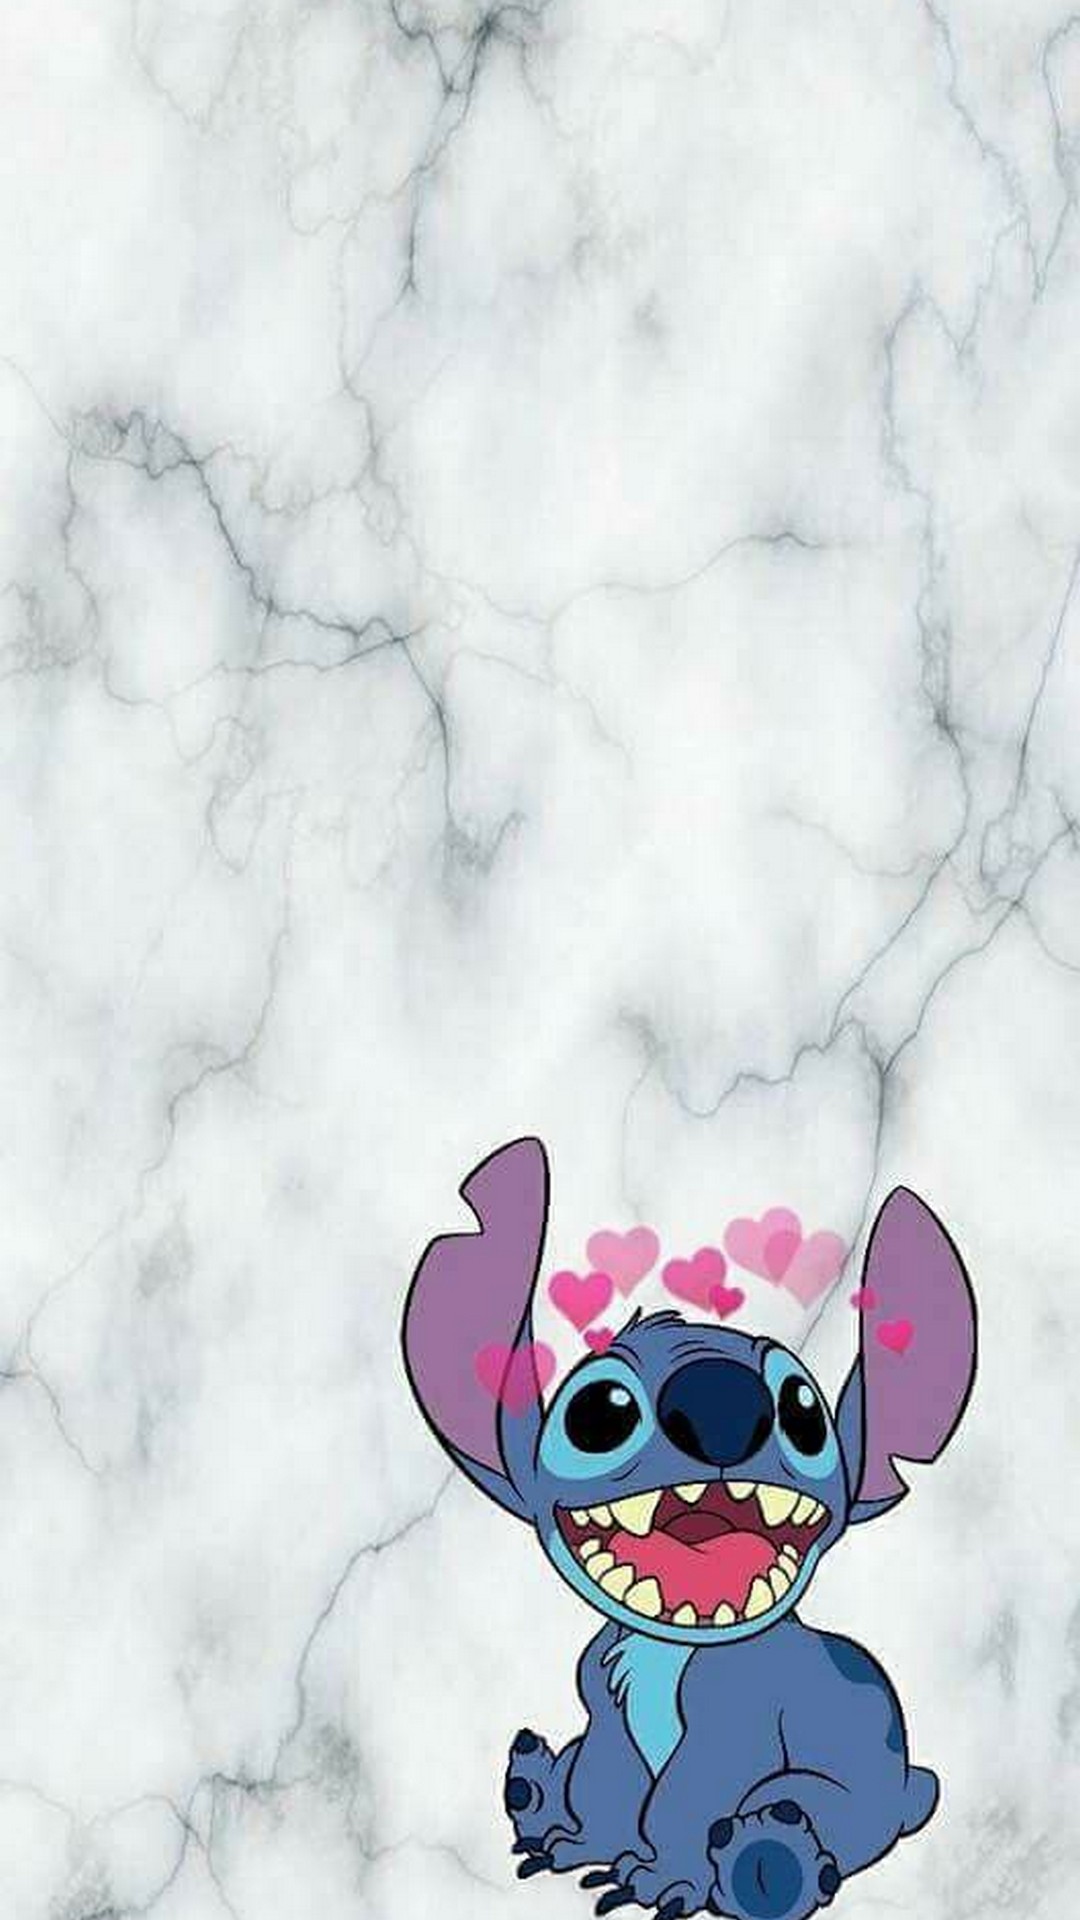 Stitch Wallpaper For Phone Resolution 1080x1920